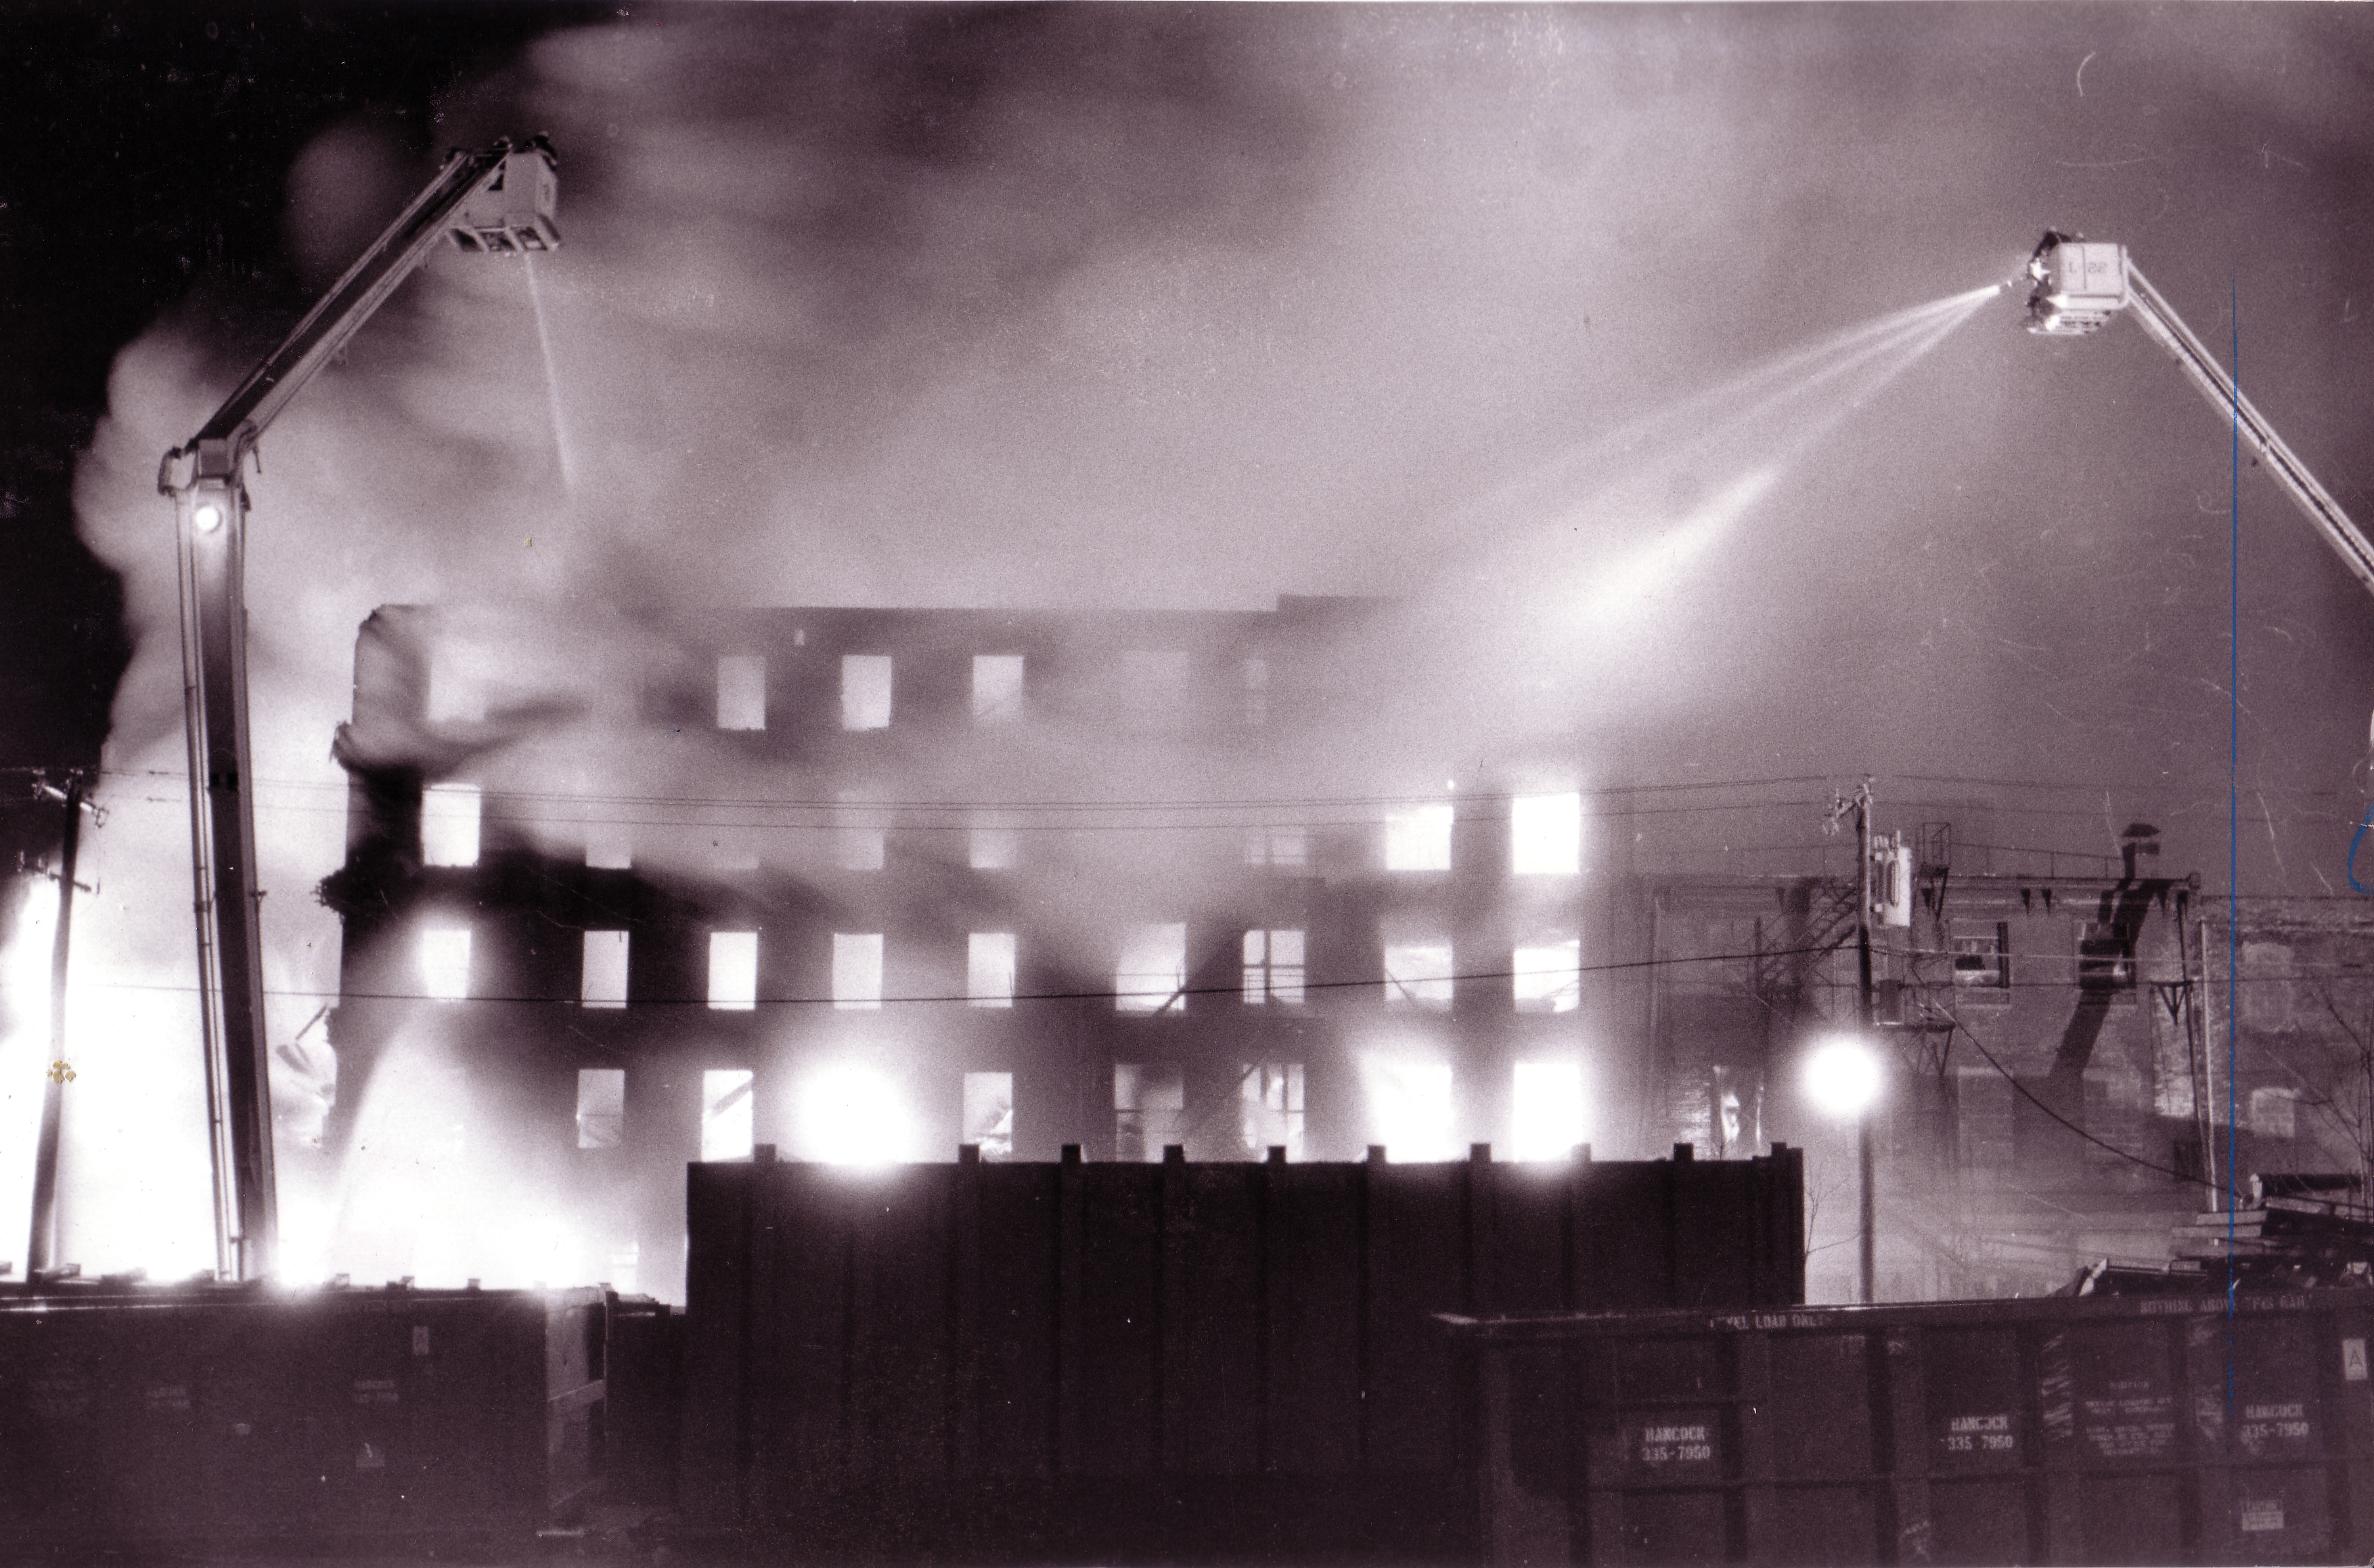  Fire consumes the Karff-Eisemann Company, which processed cotton for quilting, at 415 Brown St. Photographer Unknown, 1986, The Philadelphia Inquirer